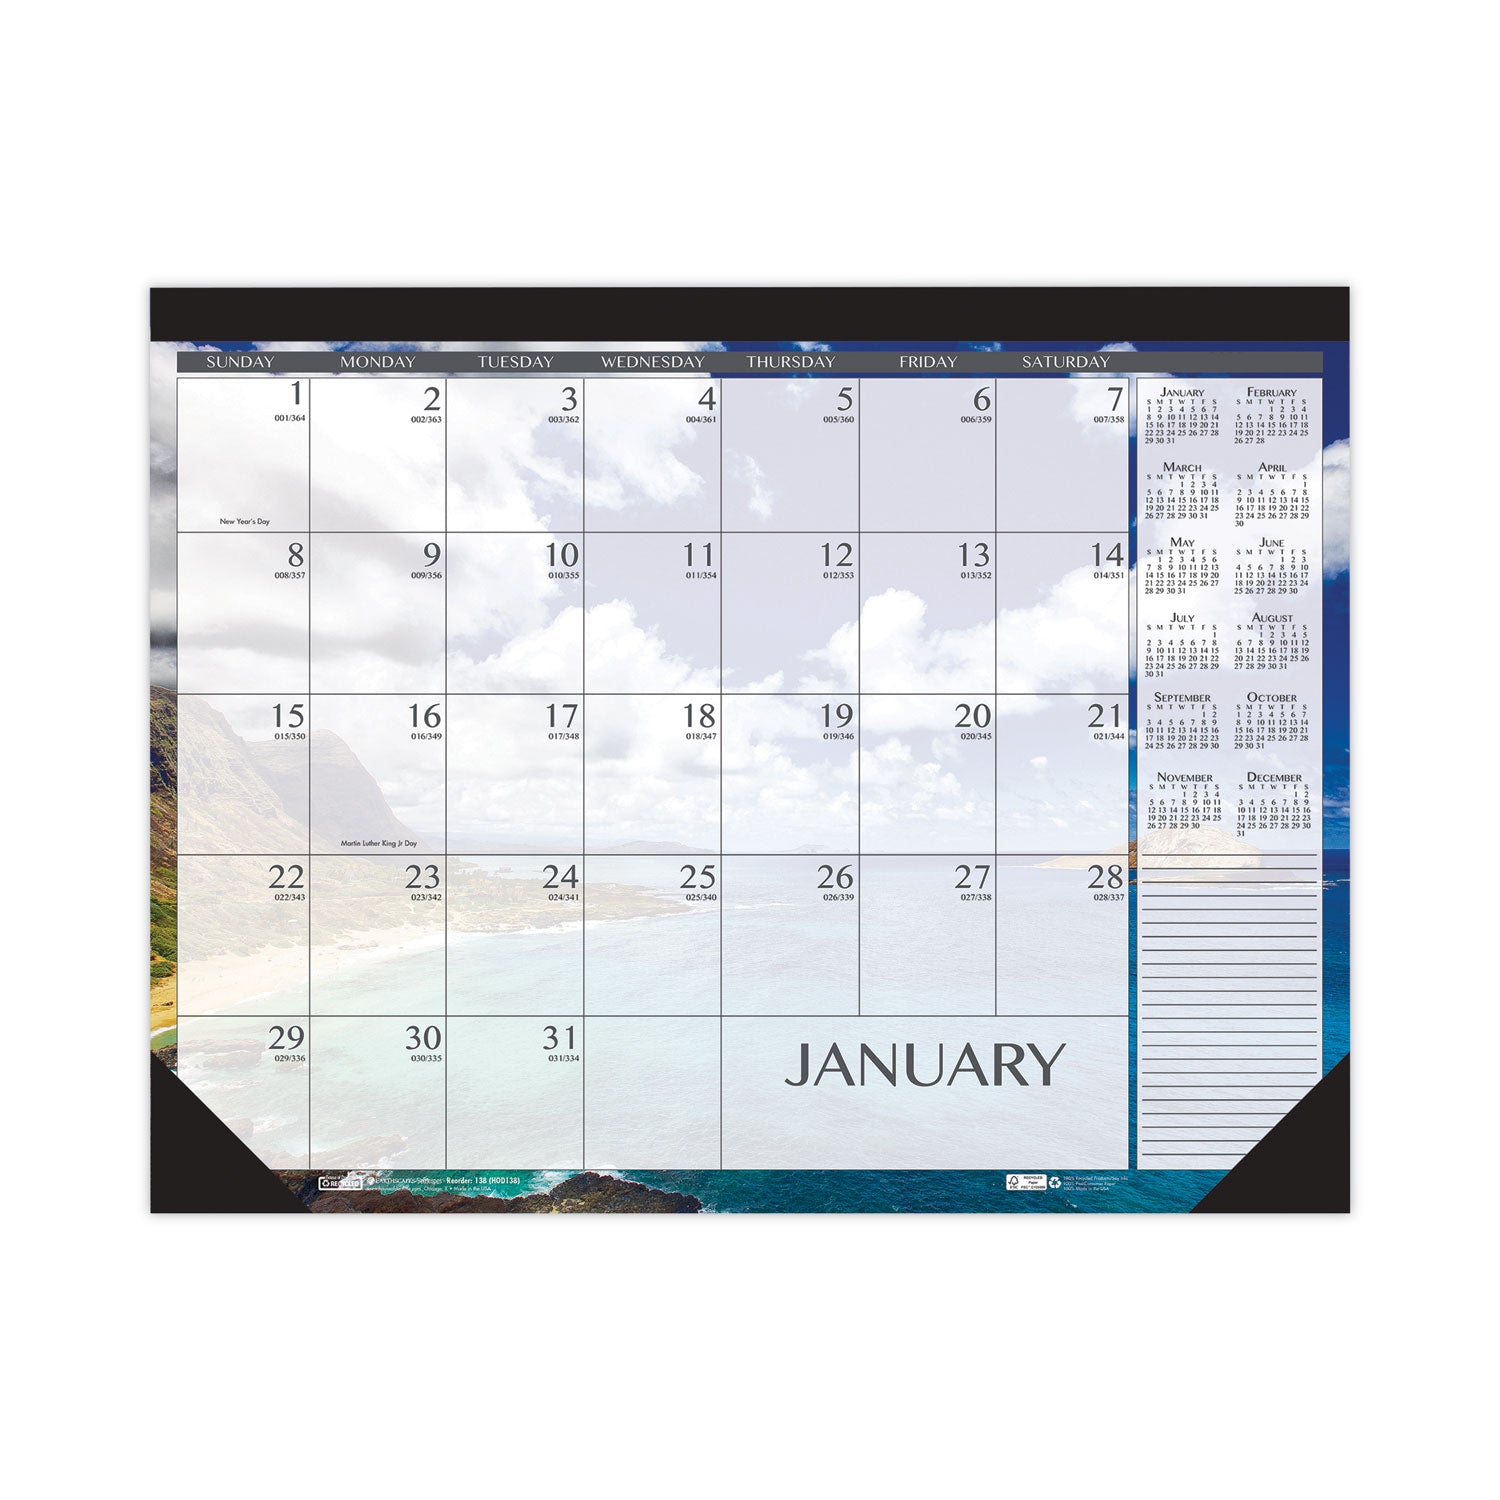 recycled-earthscapes-desk-pad-calendar-seascapes-photography-185-x-13-black-binding-corners12-month-jan-to-dec-2024_hod1386 - 1